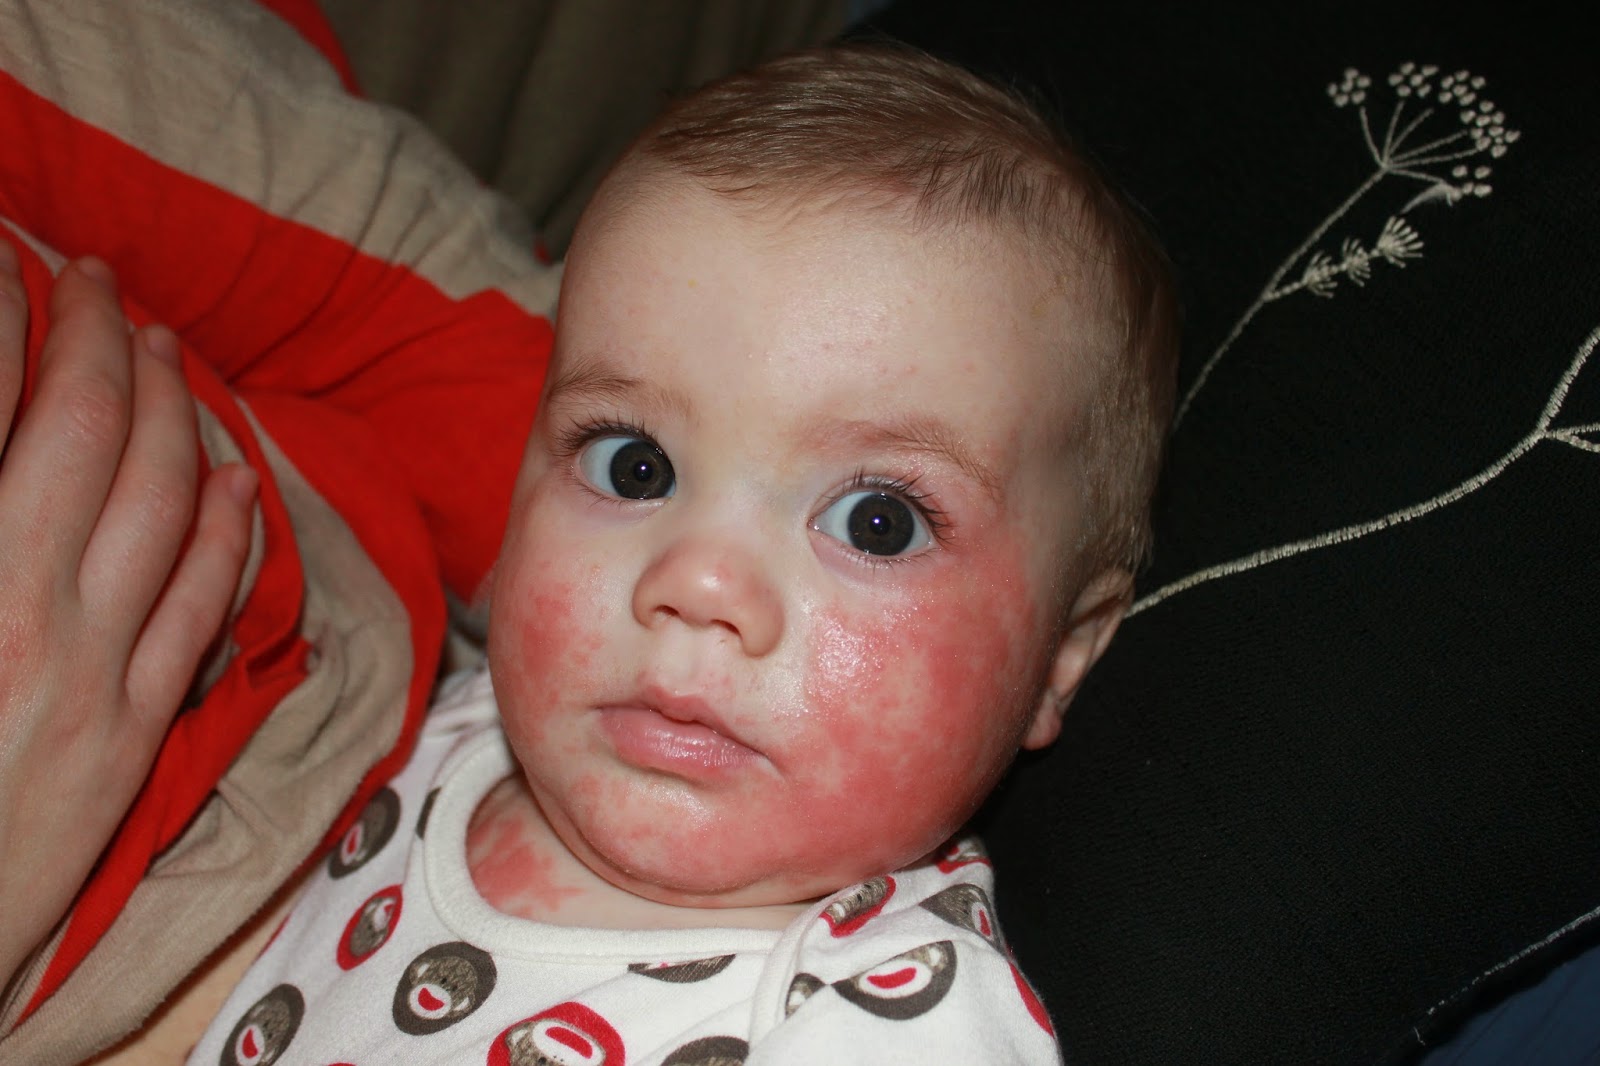 House of Thorns: Infant Eczema + Allergies and Why I